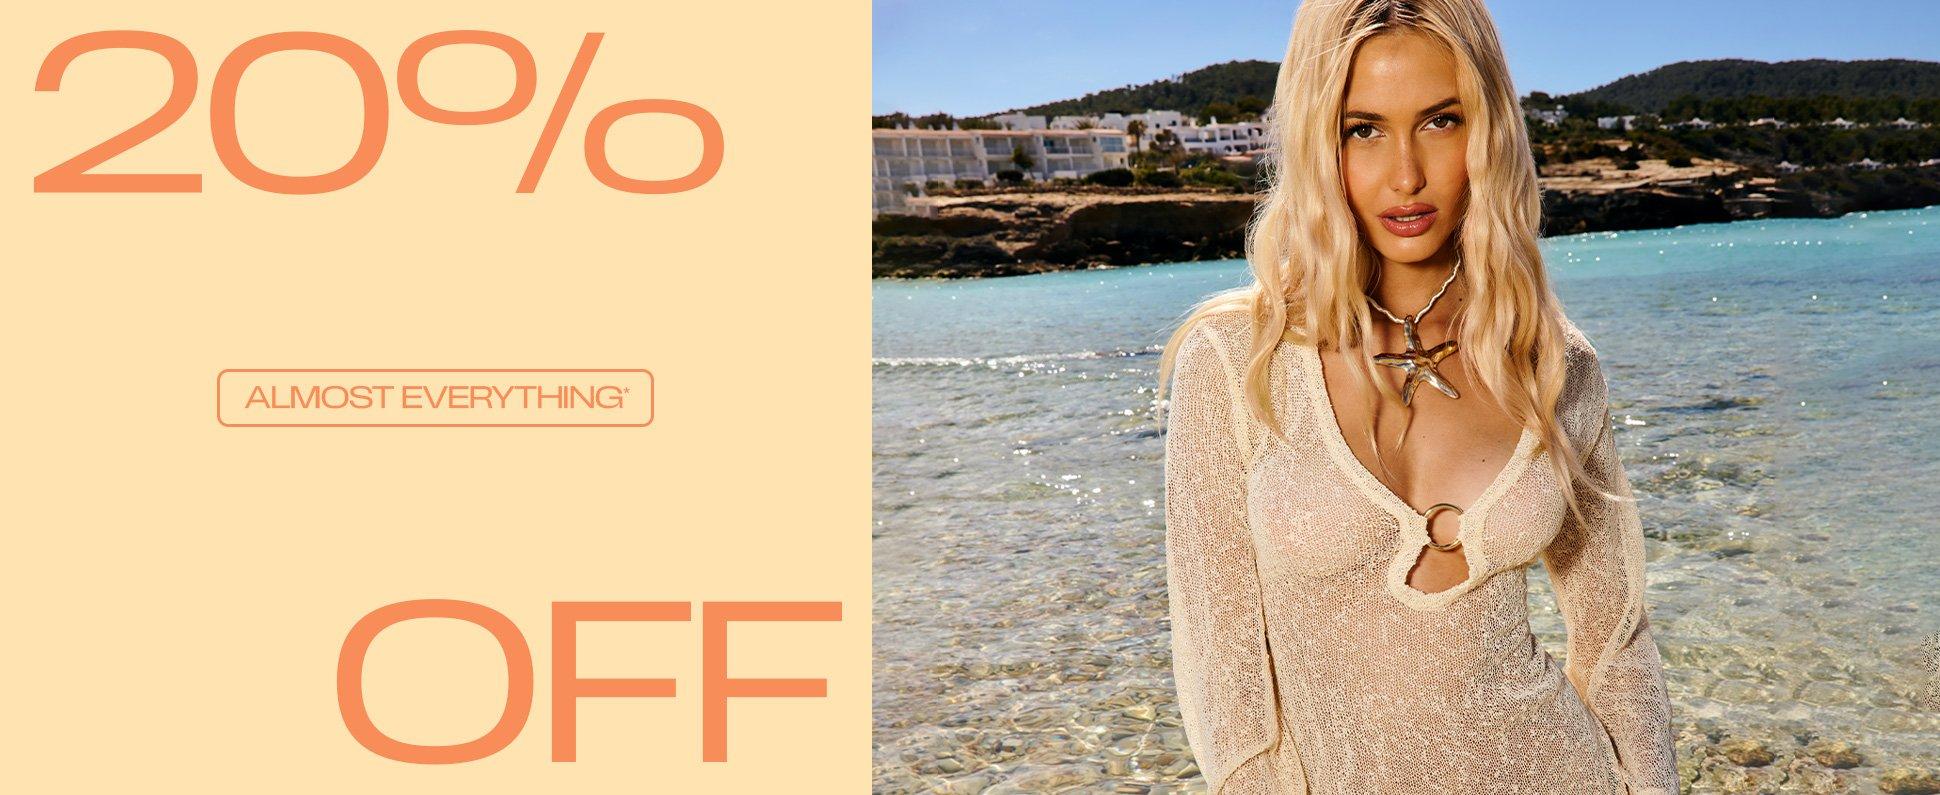 20% Off Almost Everything!